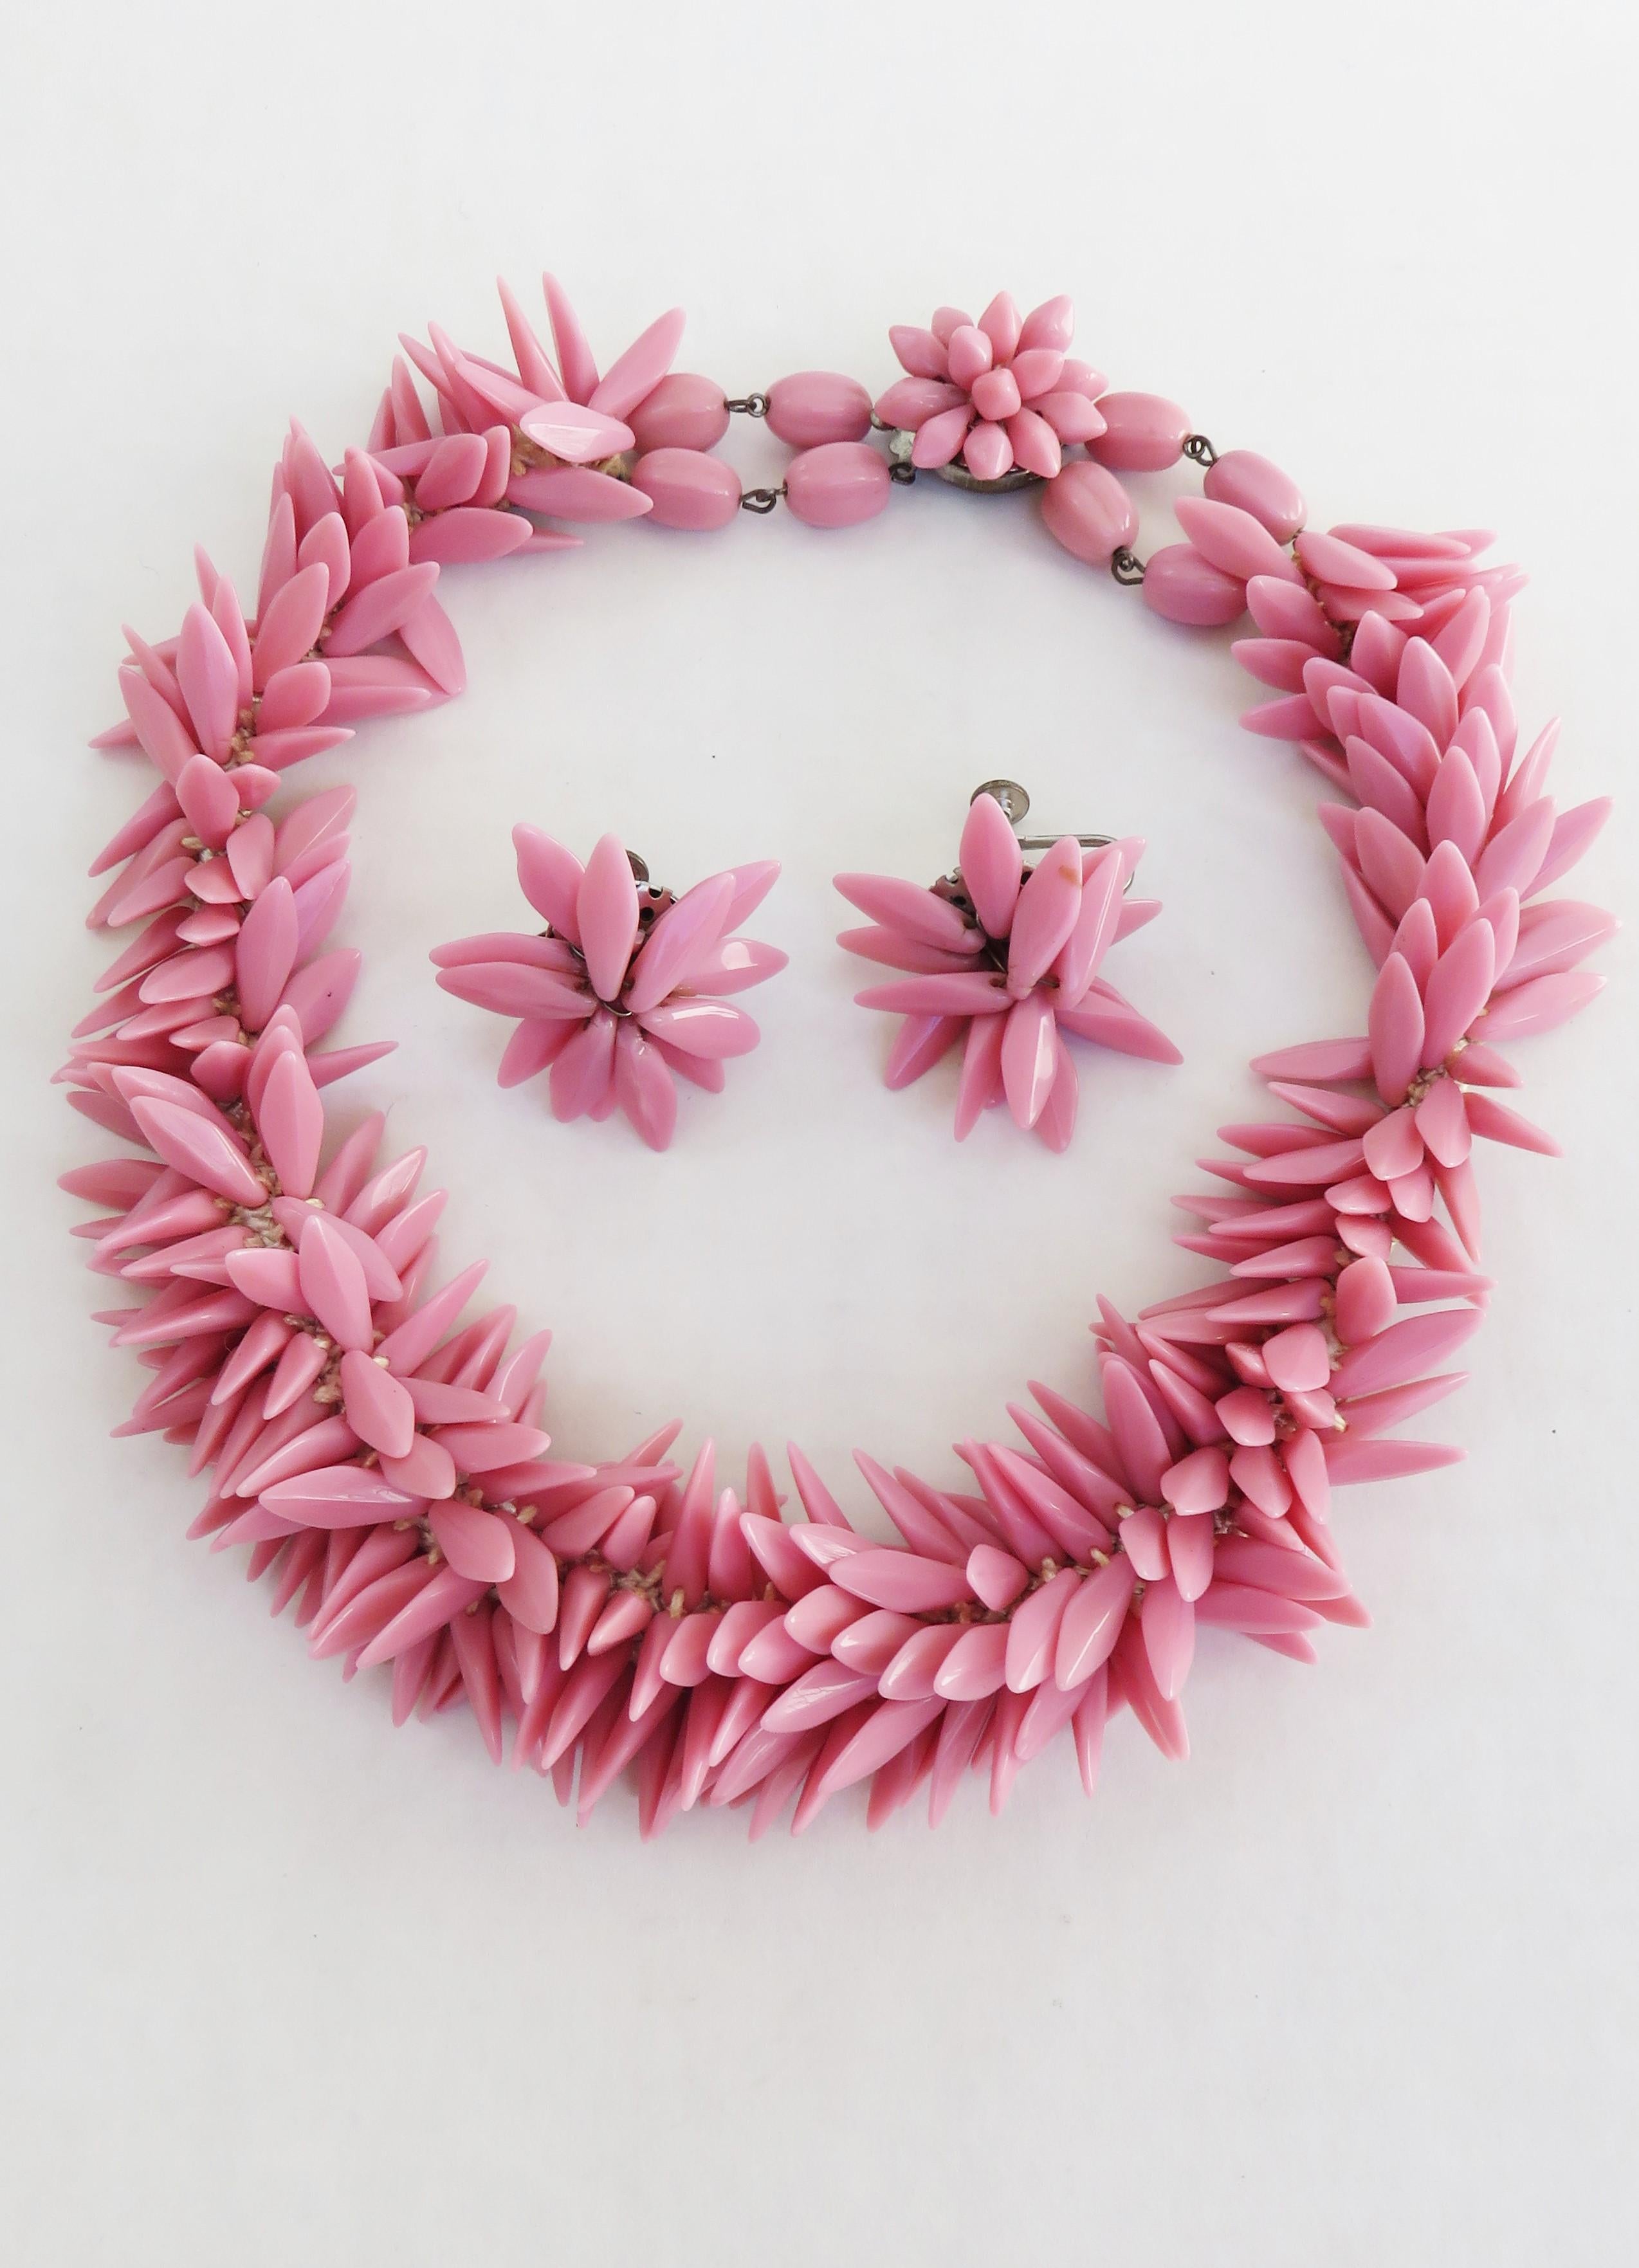 A gorgeous elaborate pink glass beaded choker necklace and screw back earring set.  The oval shaped beads are attached to netting on the underside for comfort and closes at the back with a flower beaded brass backed clasp.  The earrings are screw